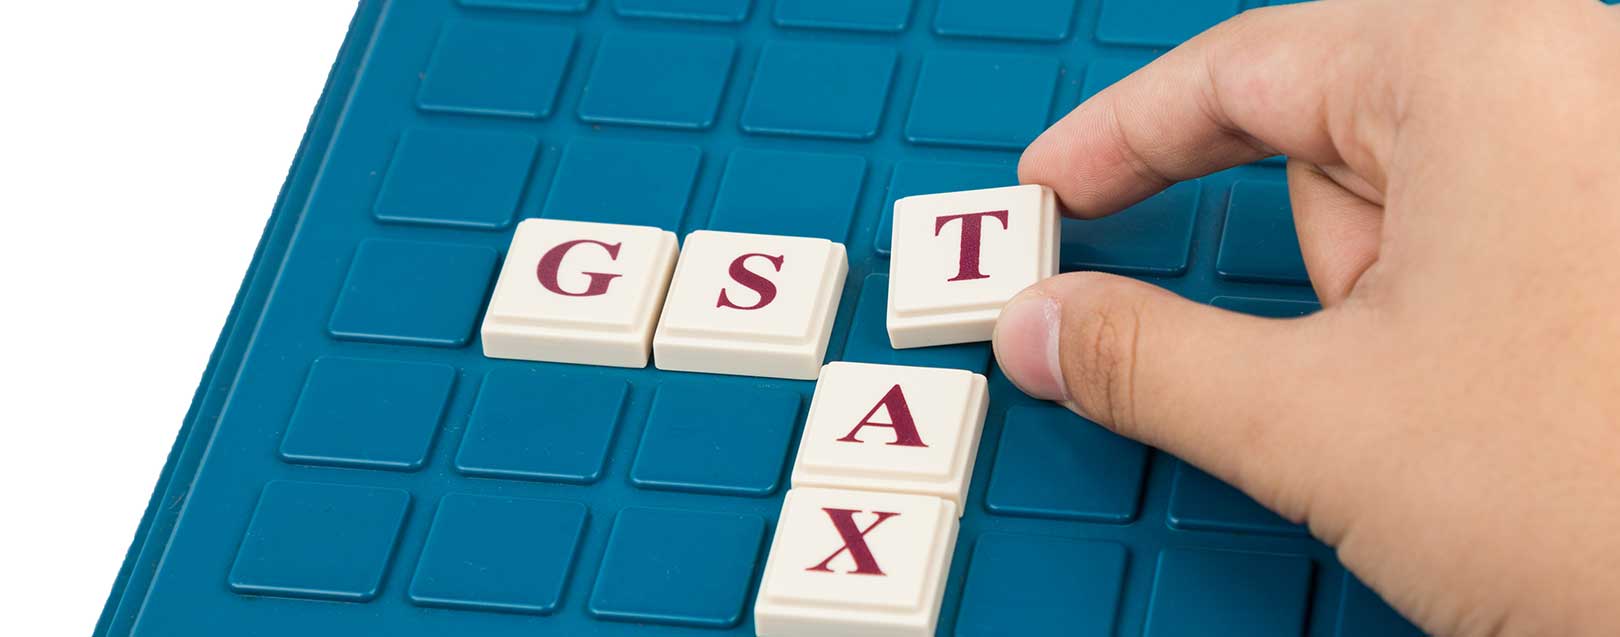 Sector specific provisions required in GST: Report